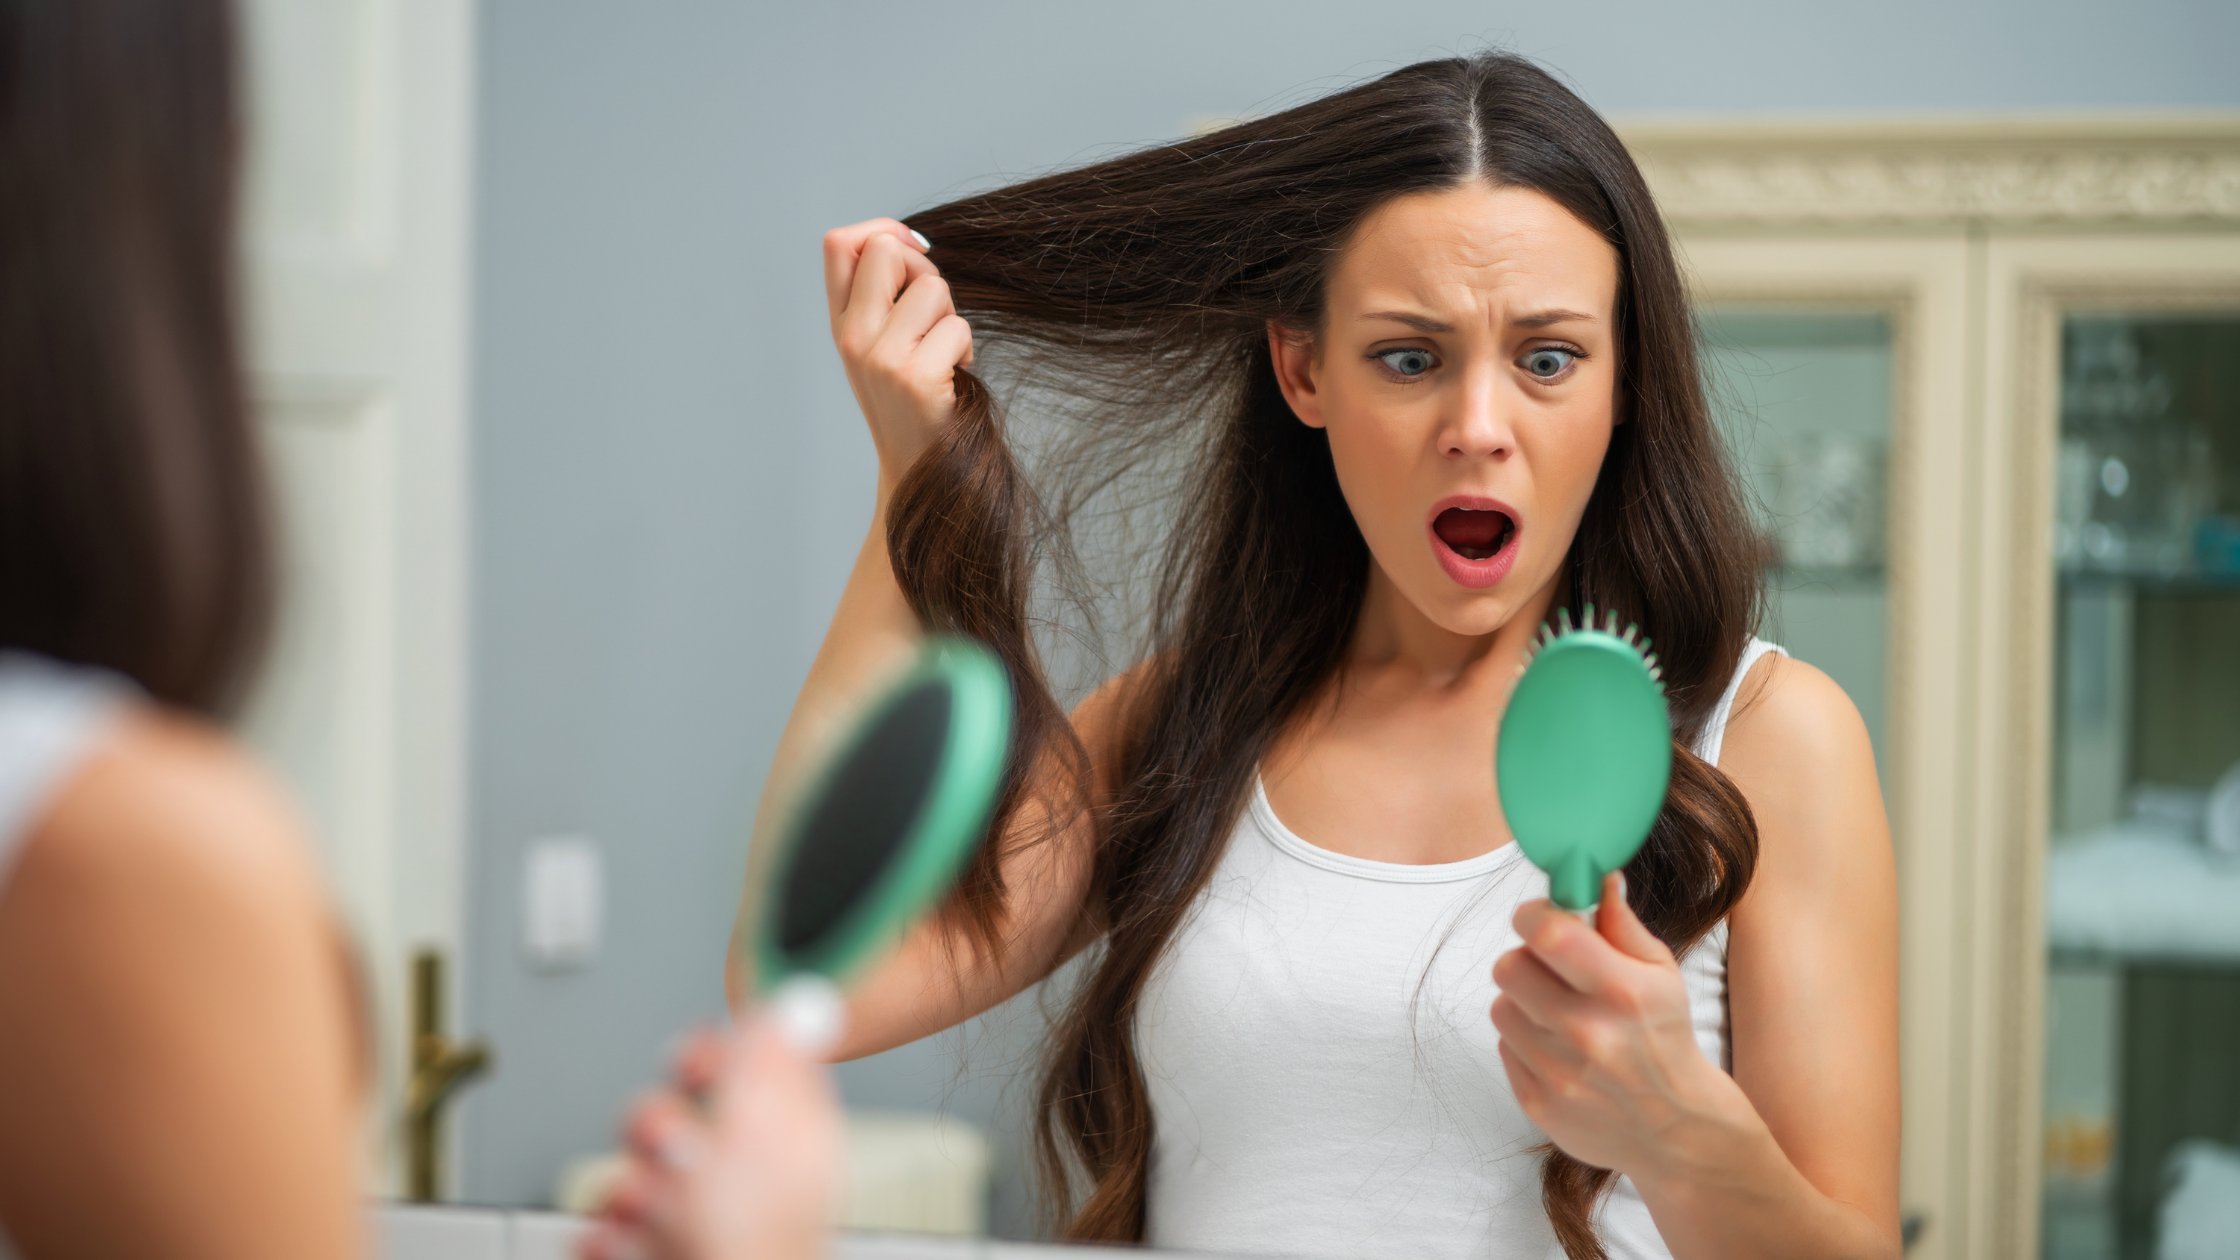 what causes premature hair loss in women?